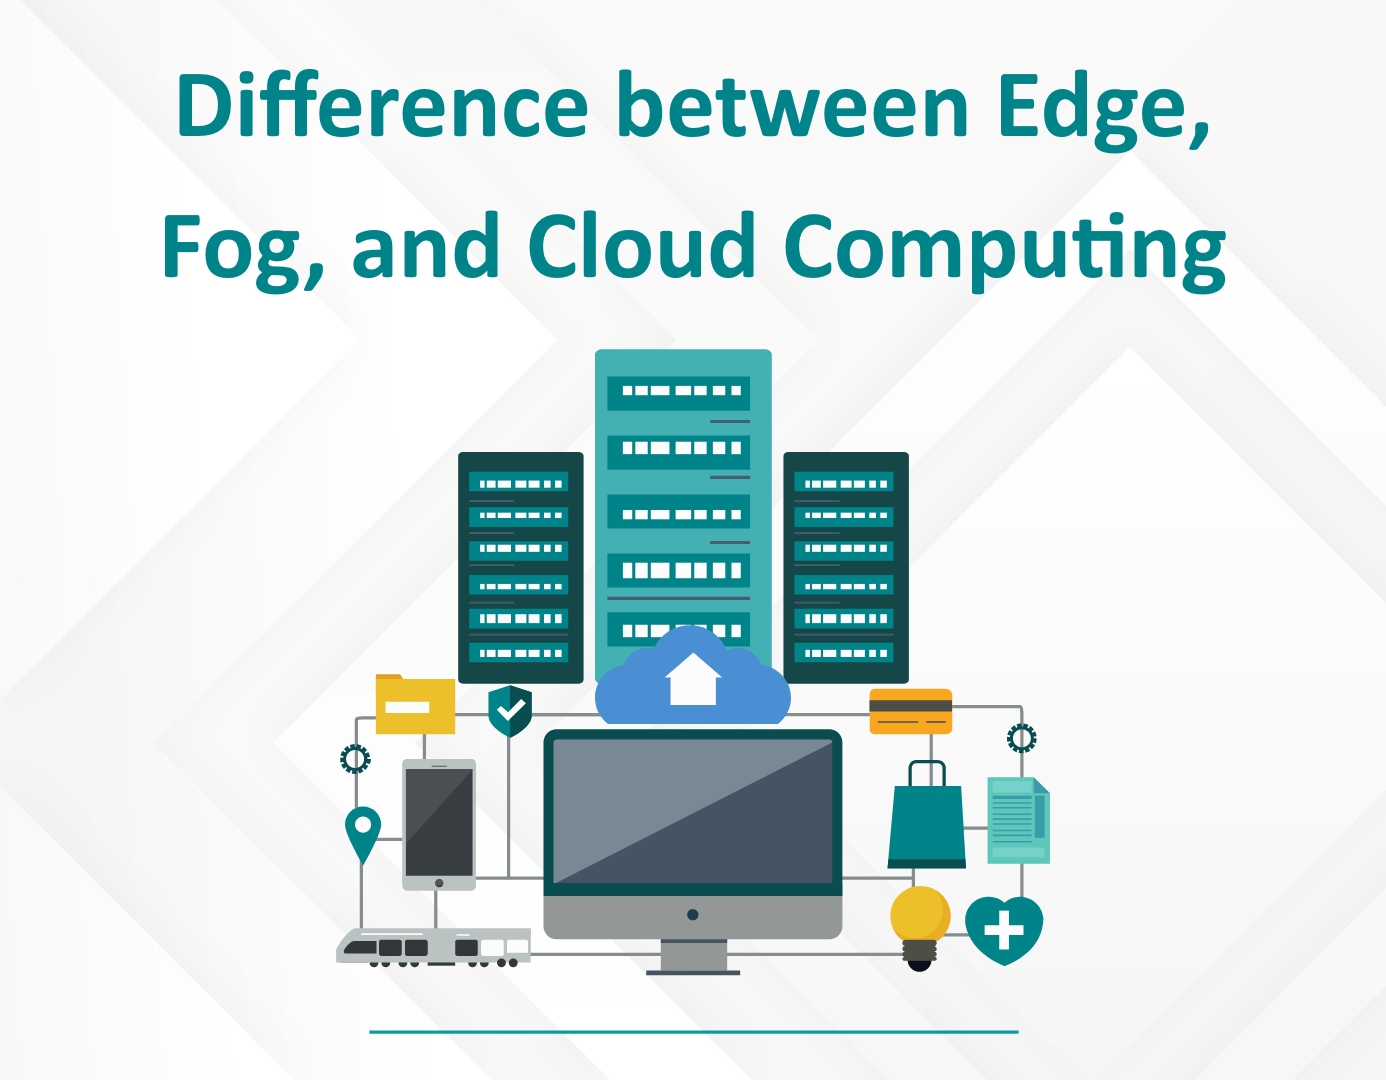 Edge, Fog, and Cloud Computing Comparison: Showing their differences for optimal data processing.